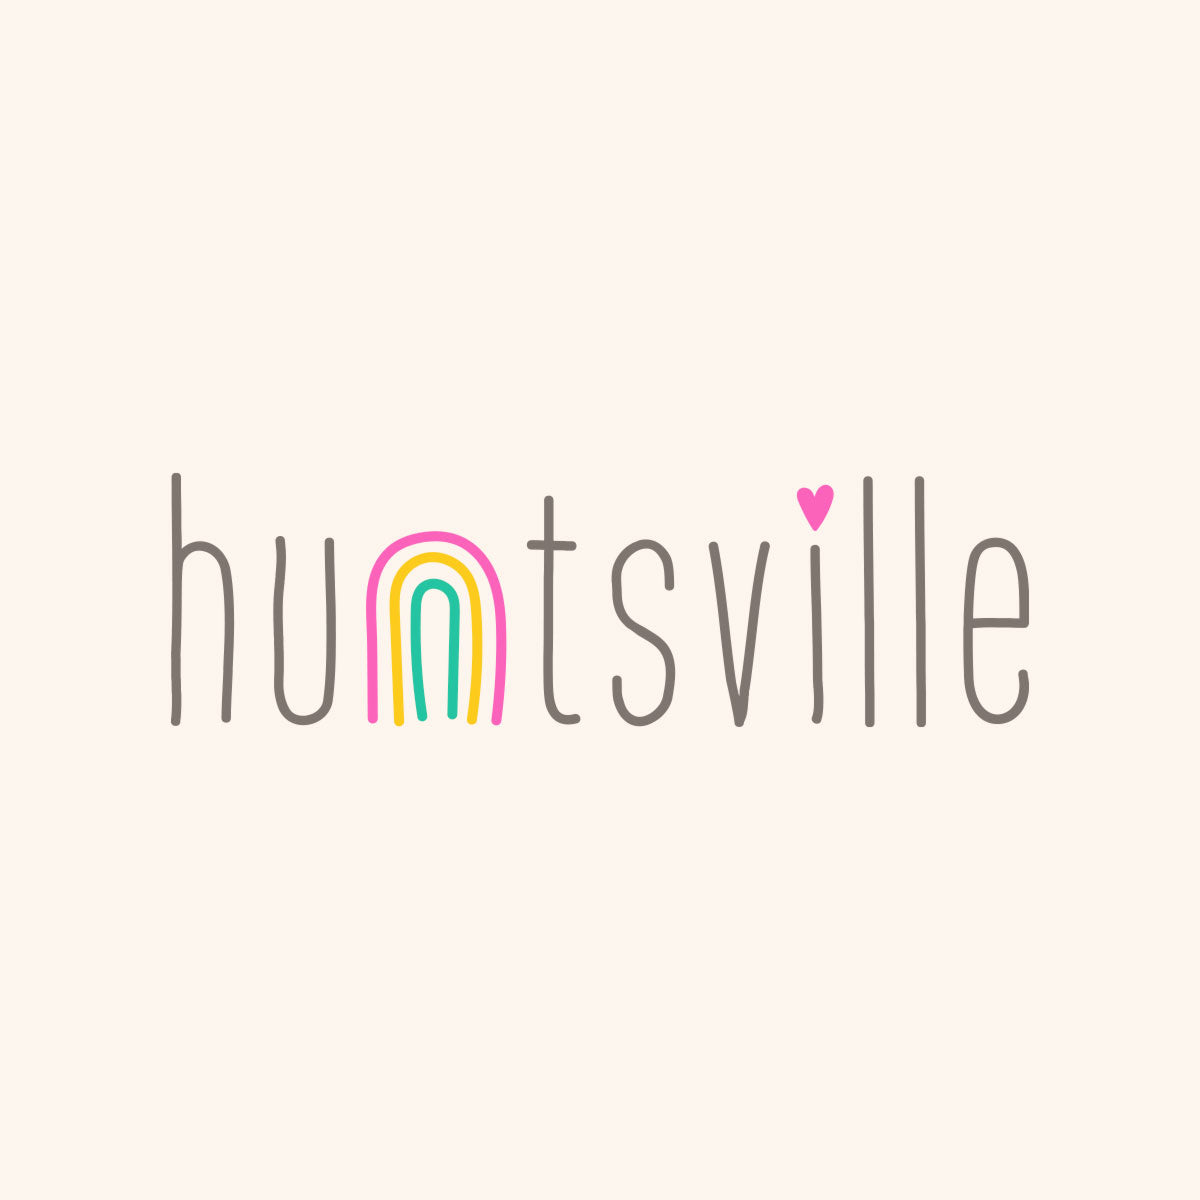 Thumbnail of the the text "huntsville" with a rainbow as the n 